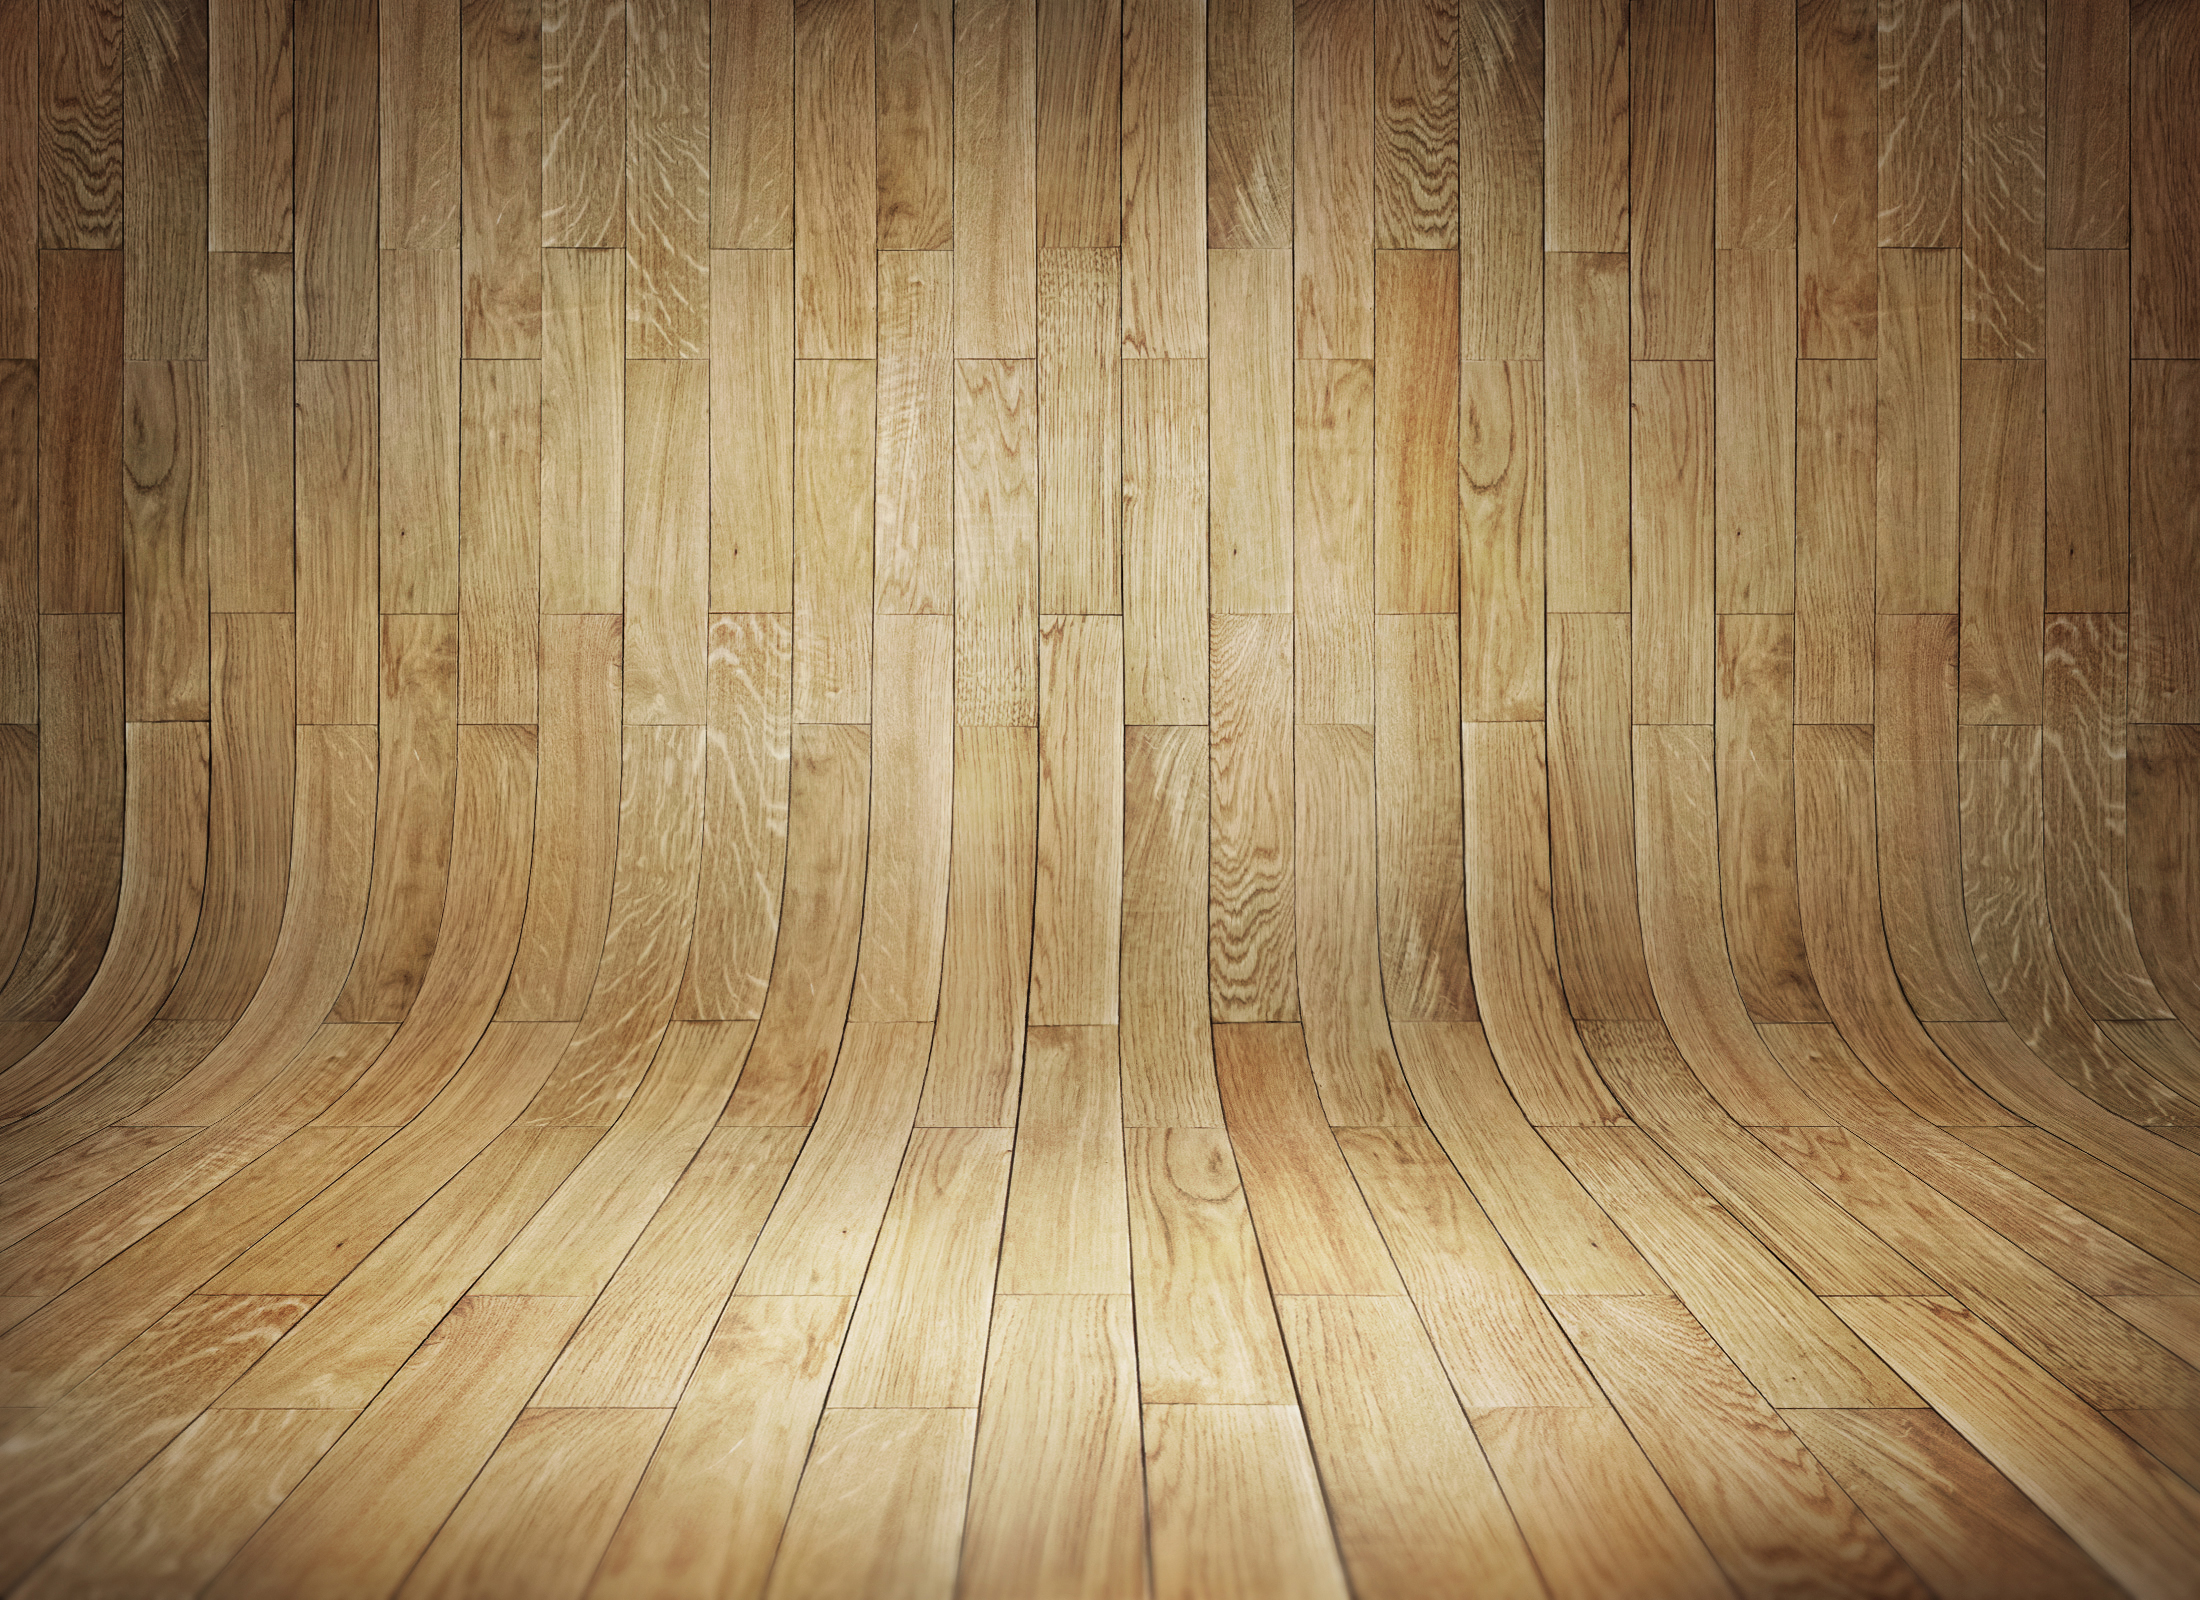 Woodworking backgrounds